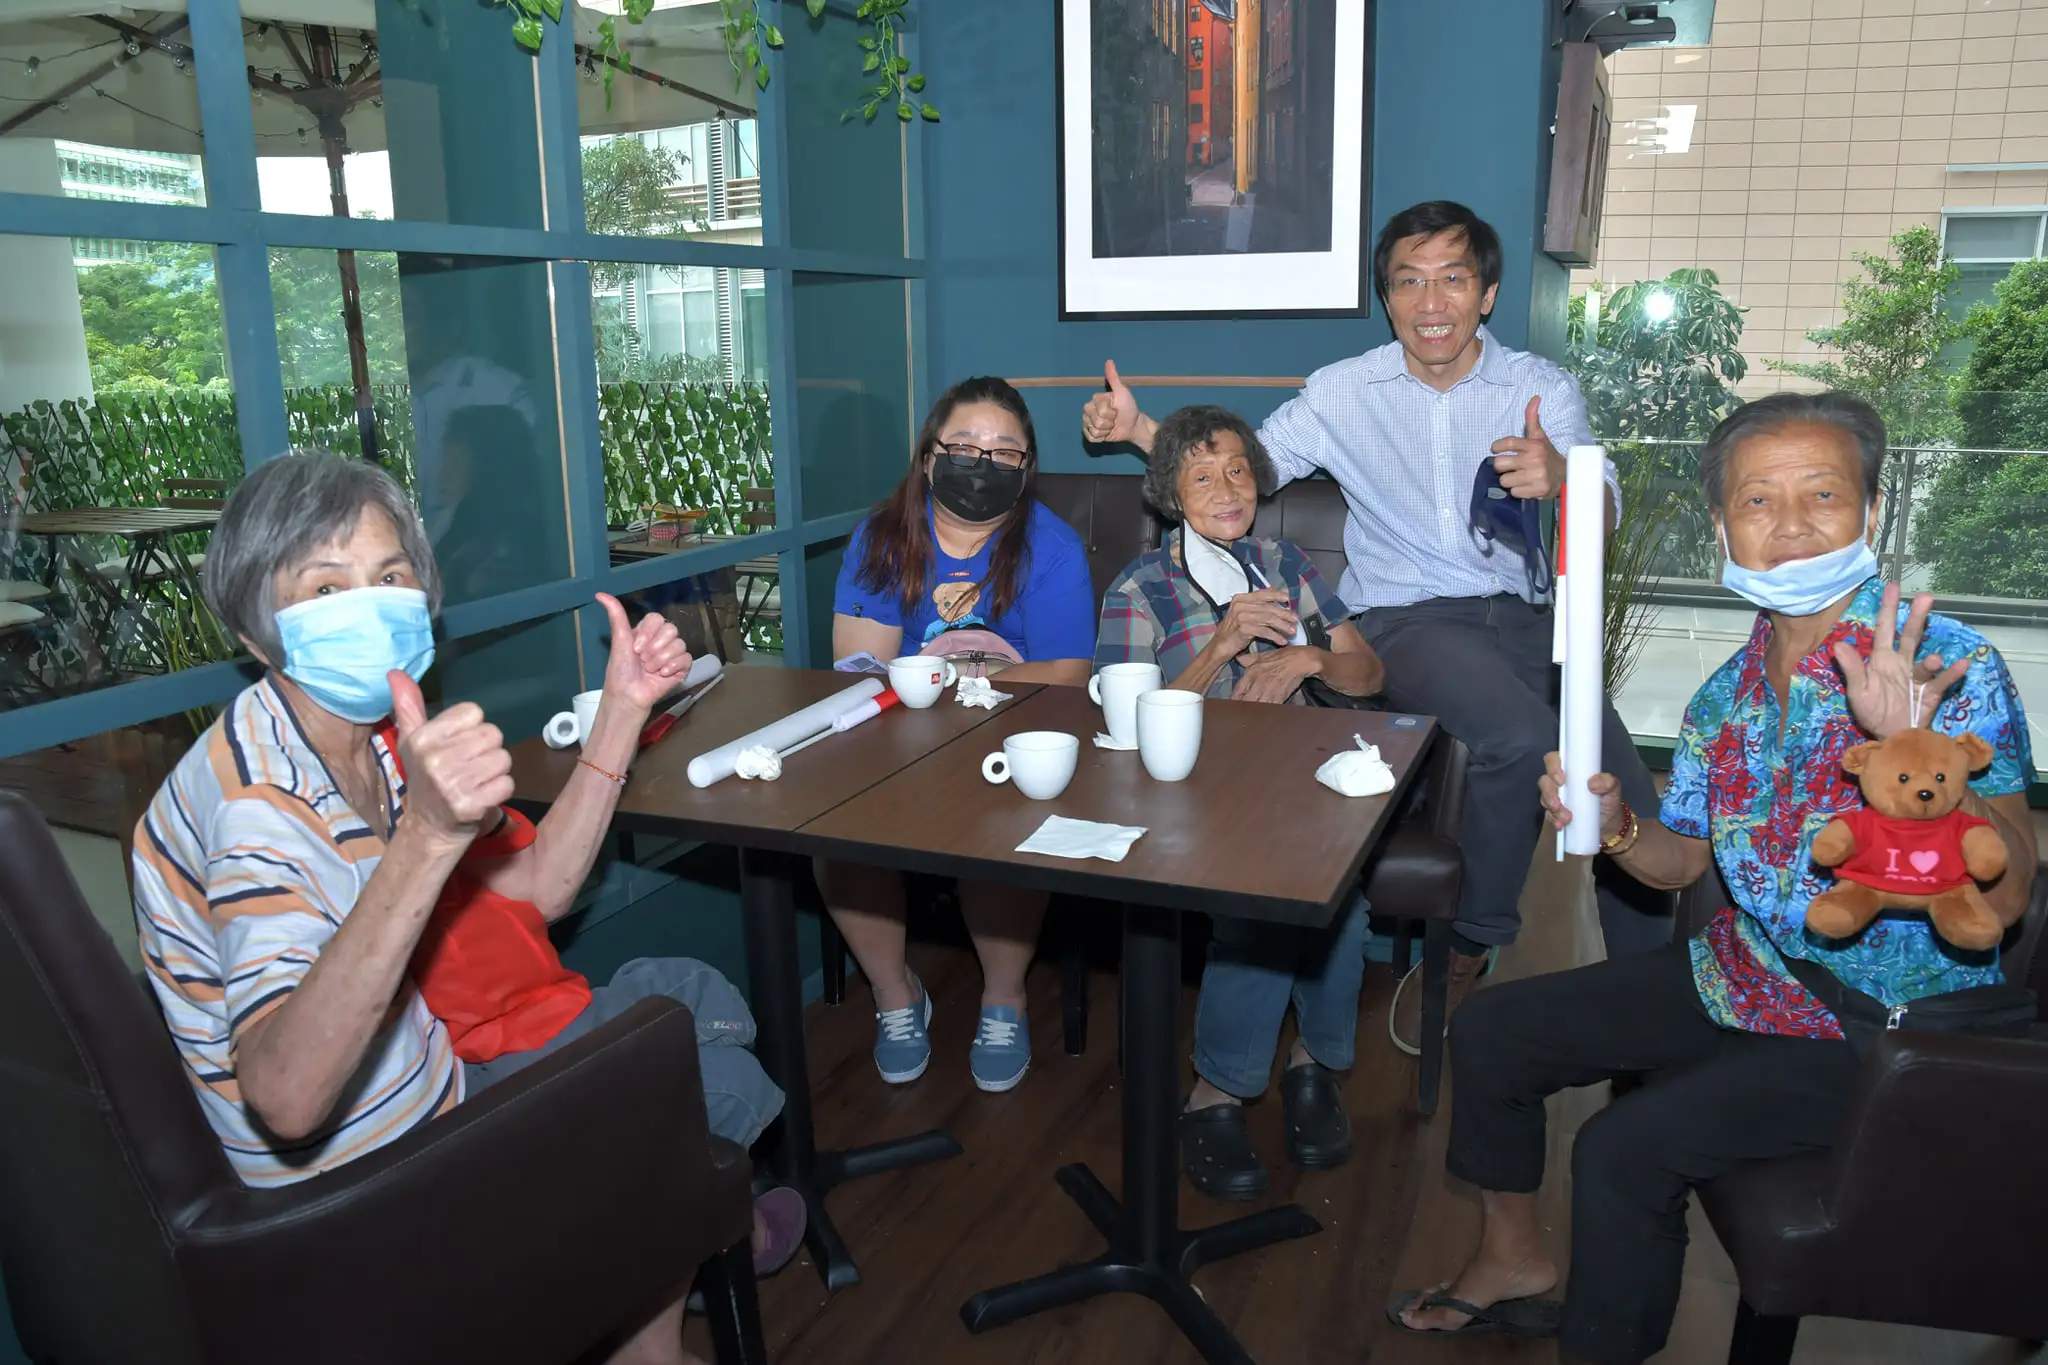 Sg politician treats migrant workers who built the cafe to lunch | weirdkaya